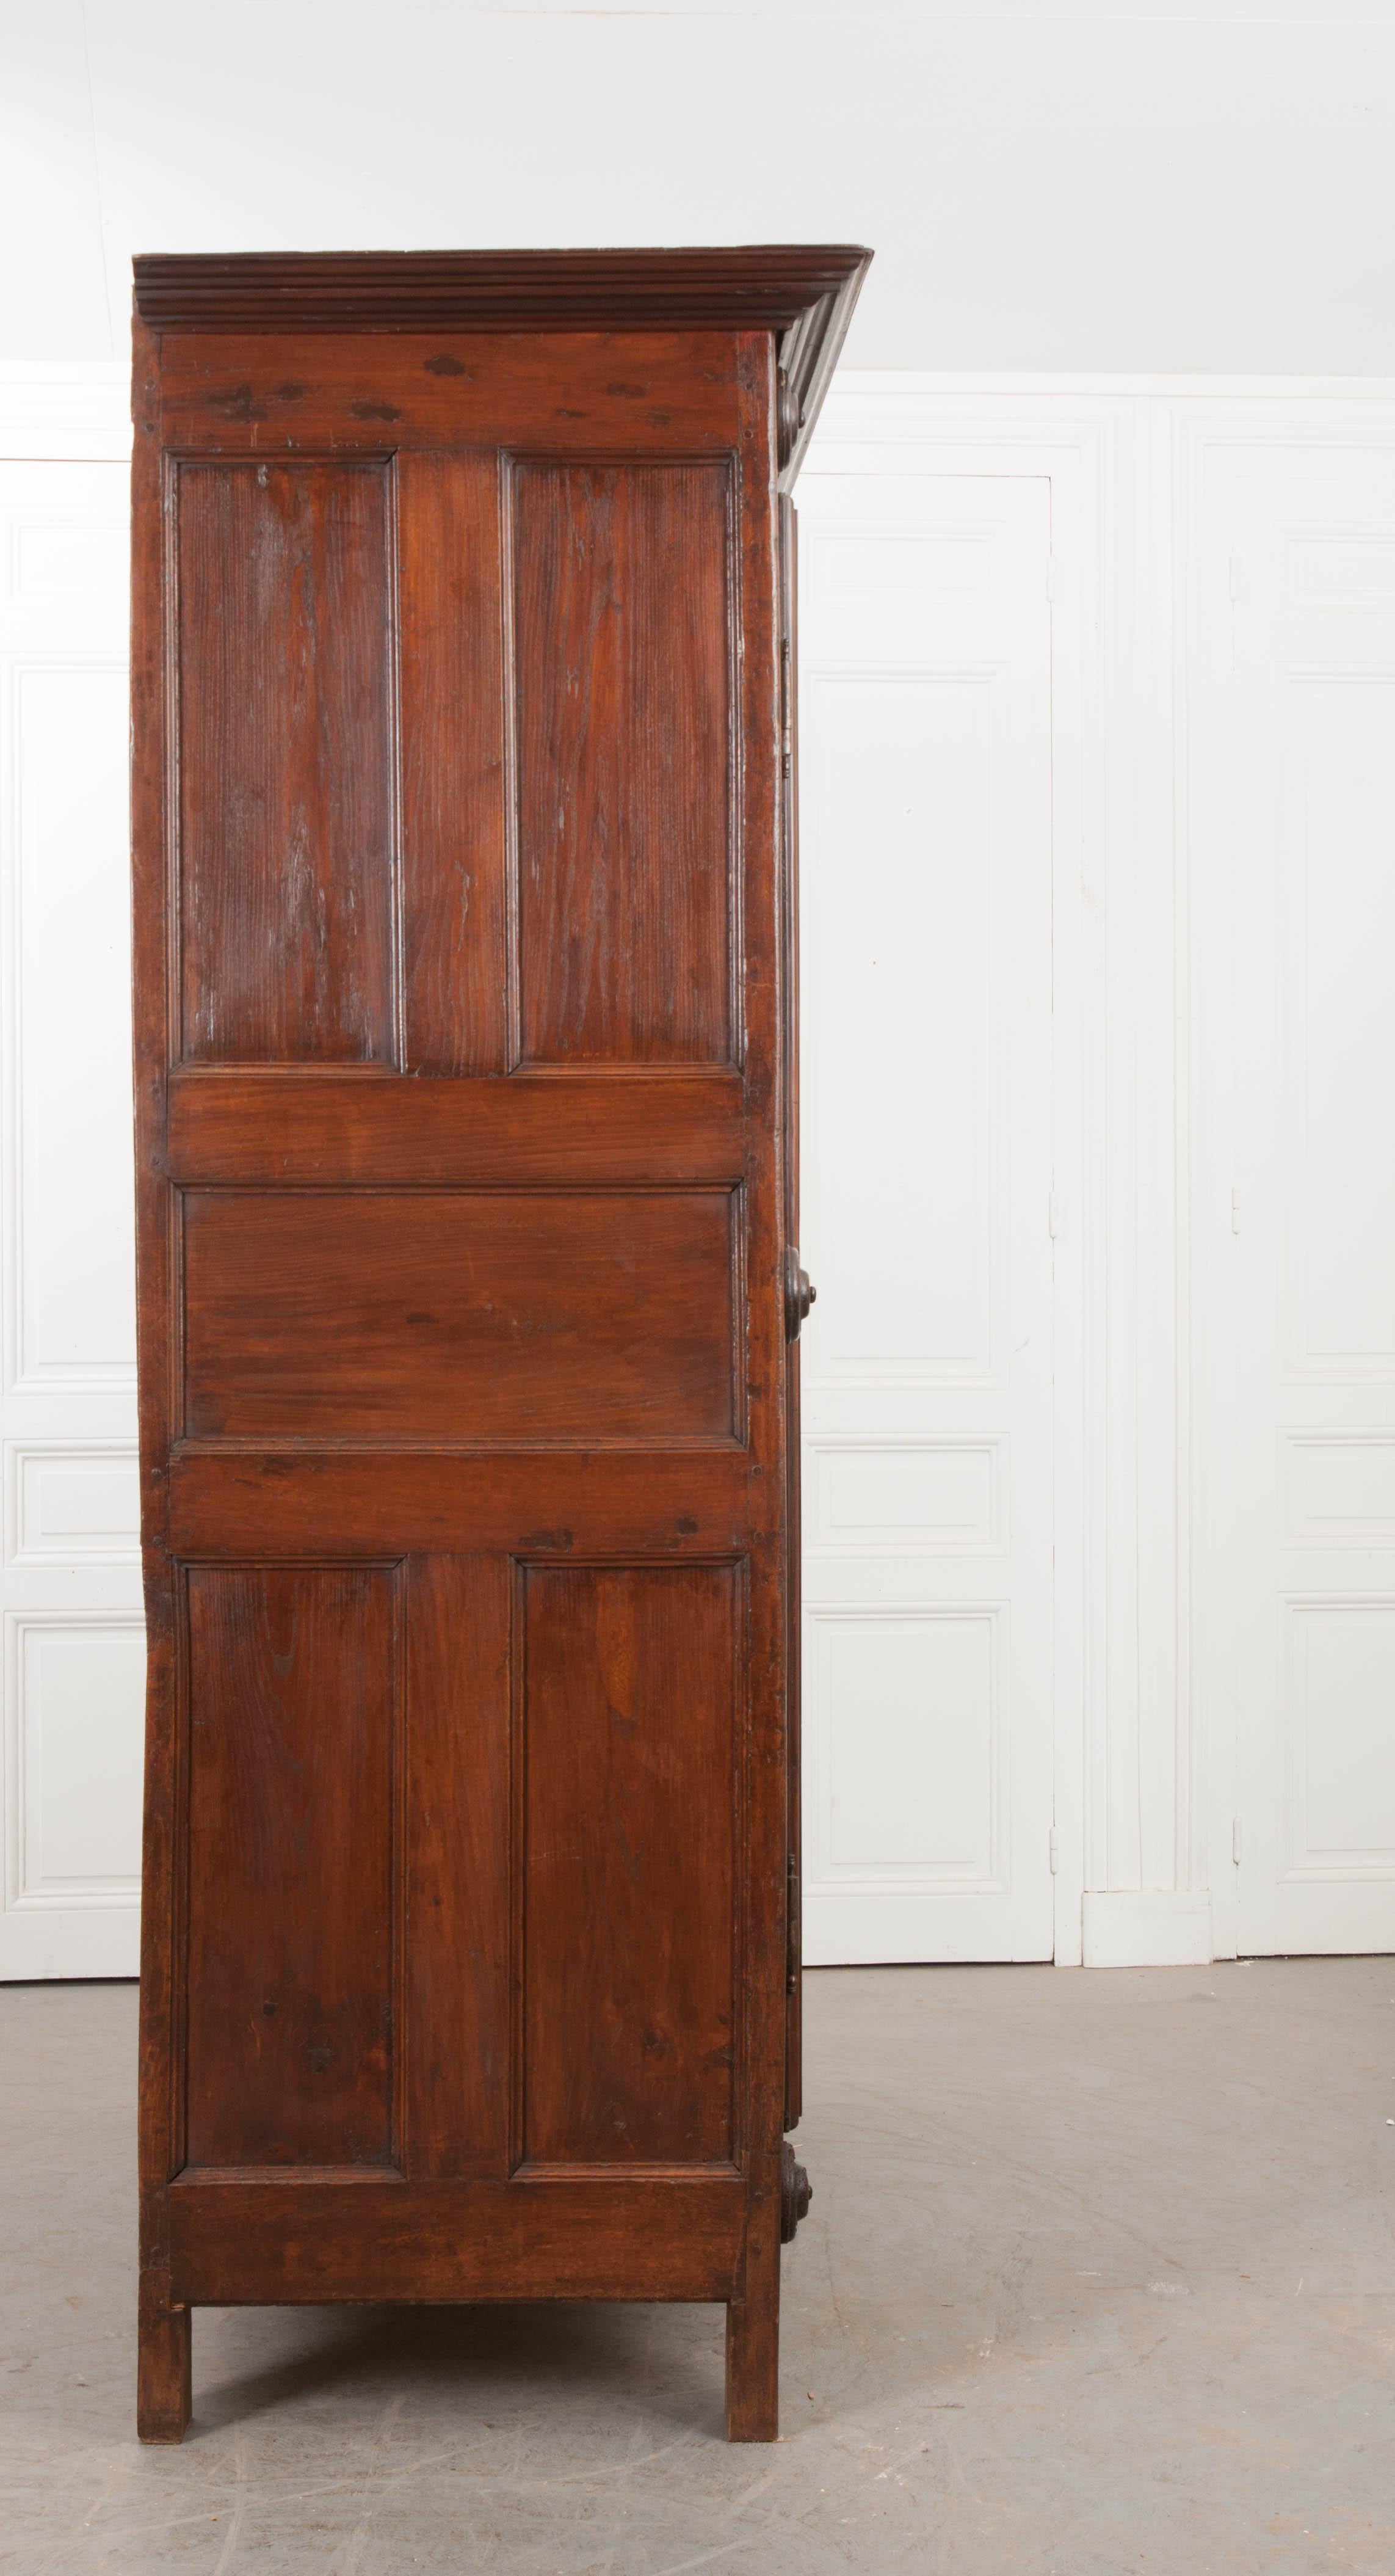 This large oak two-door armoire is from France, circa 1780s, and has a rich, warm patina. Characteristic of the Louis XIII style (1610-1643), it features boldly carved and paneled doors with steel hinges, surrounded by seven turned roundels, shaped